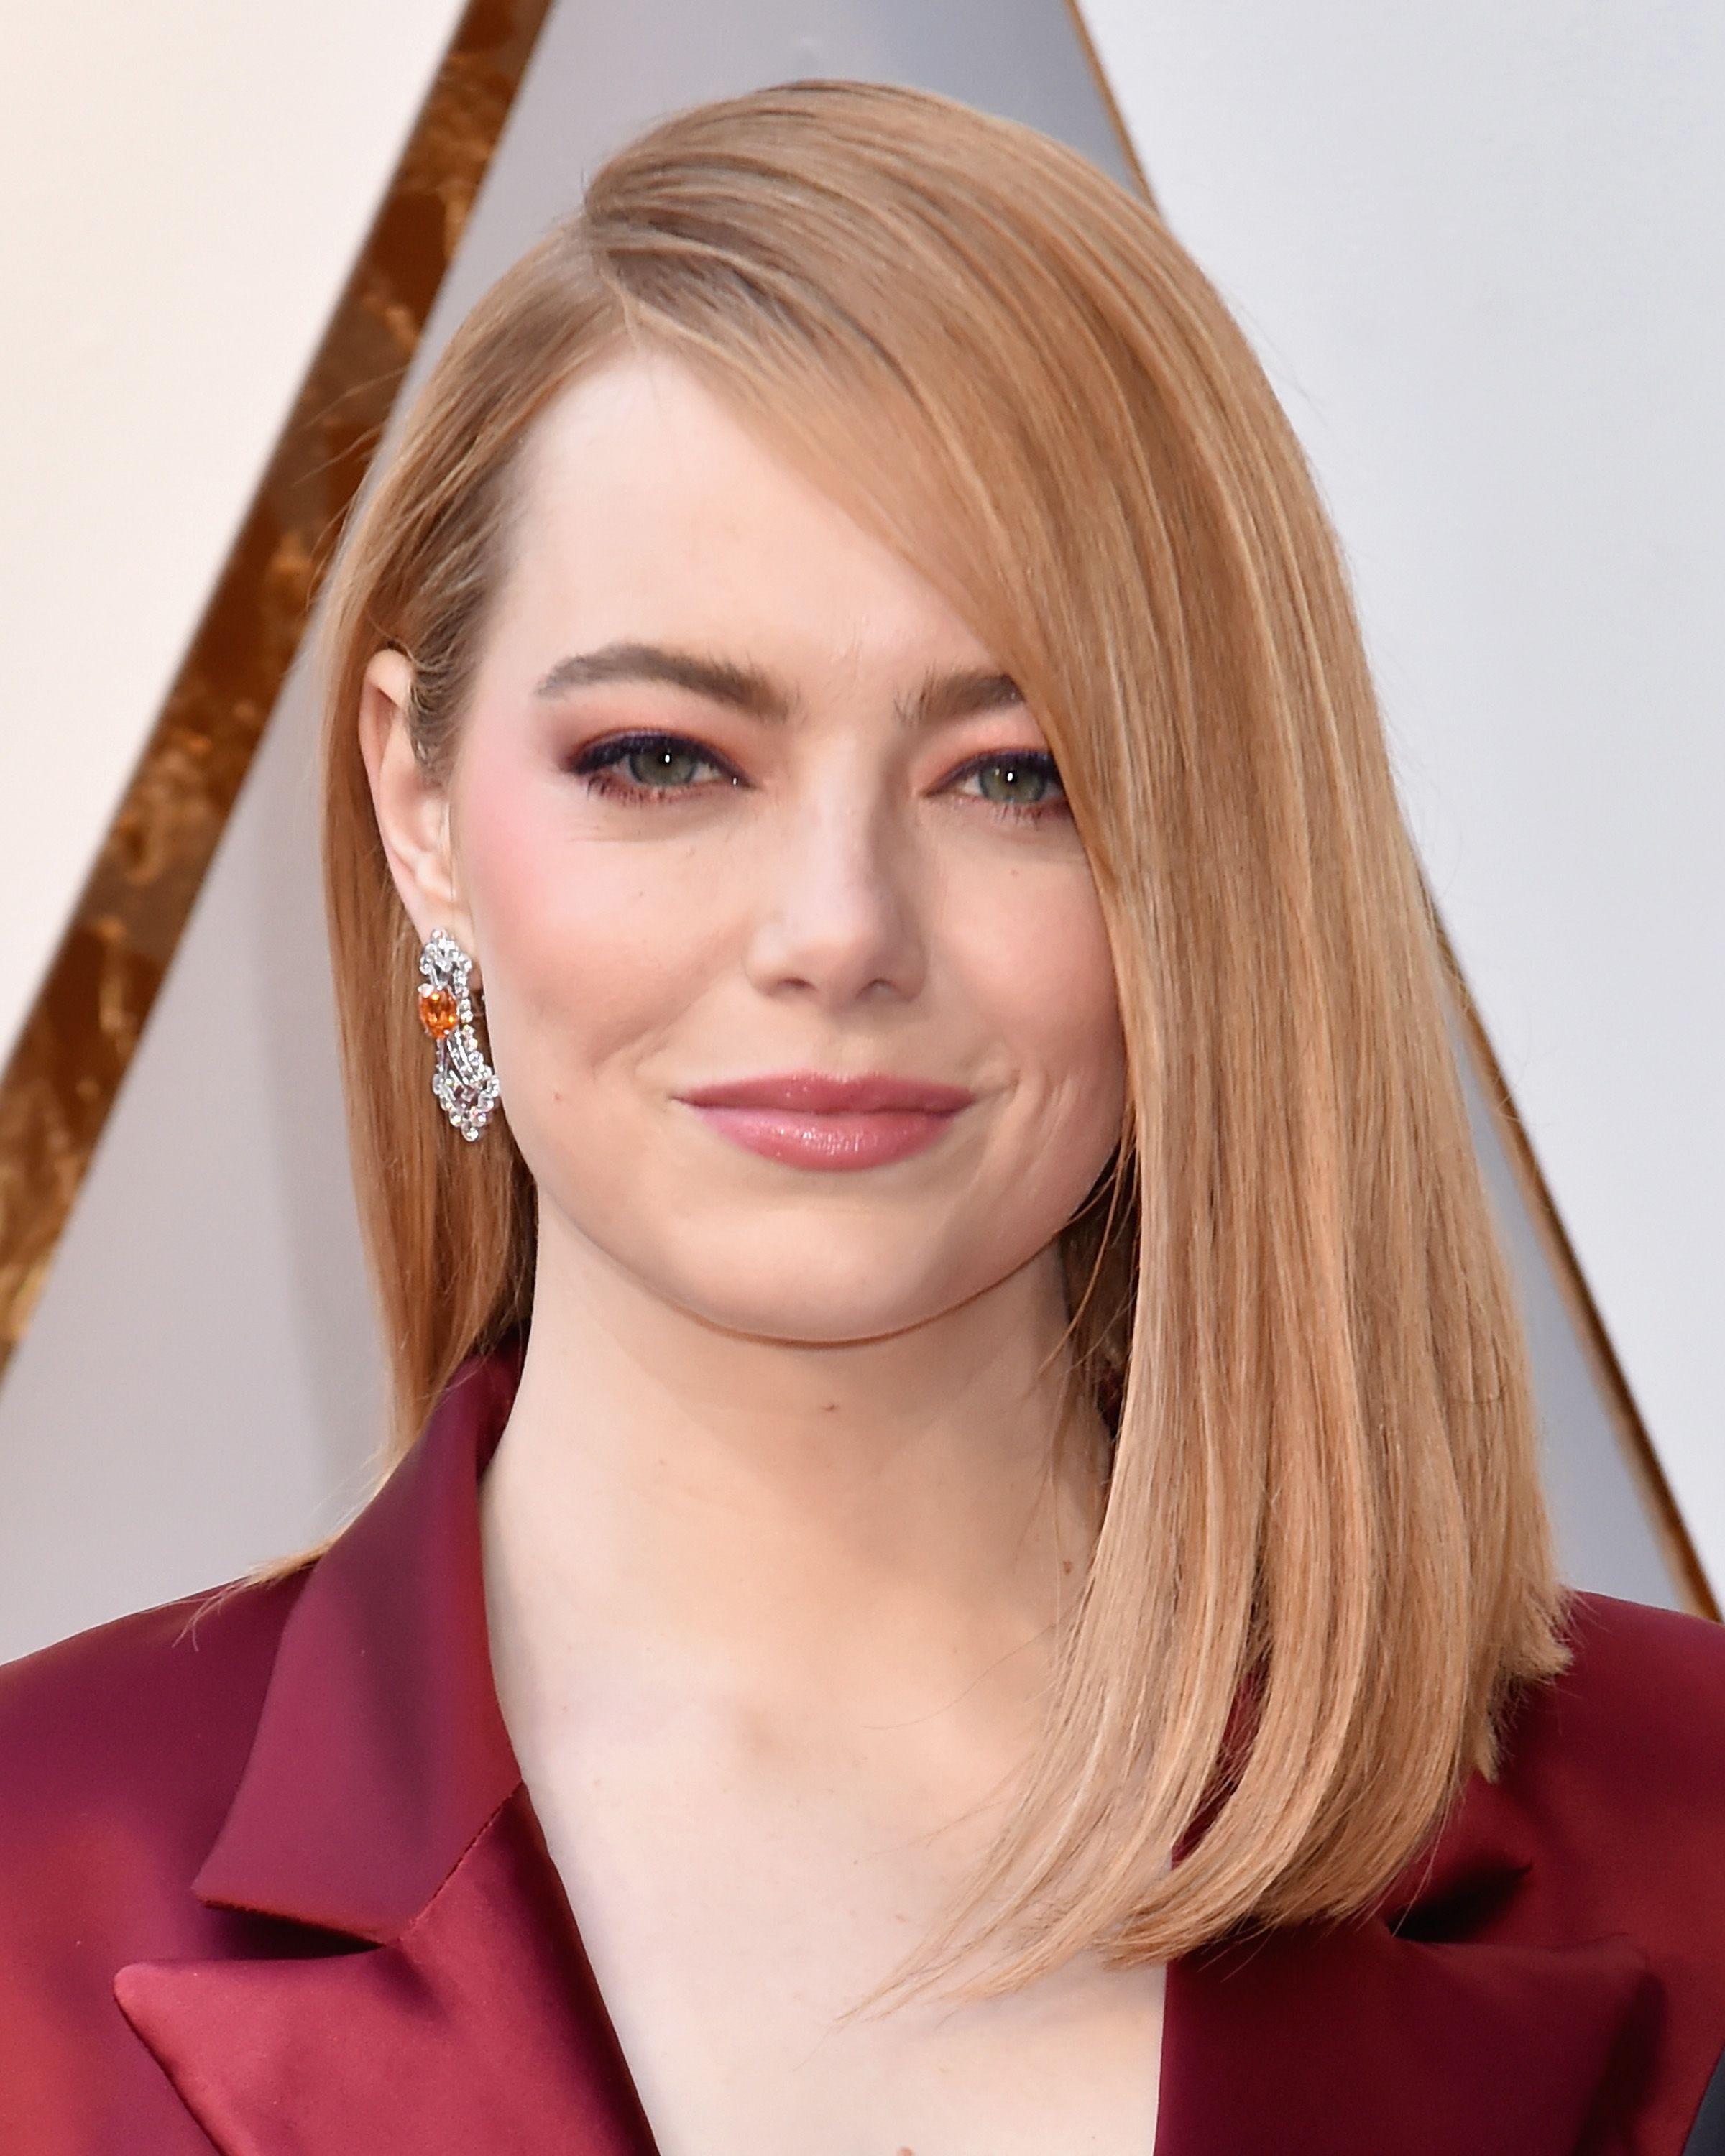 Emma Stone Wore Pants and a Blazer on the Oscars 2018 Red Carpet